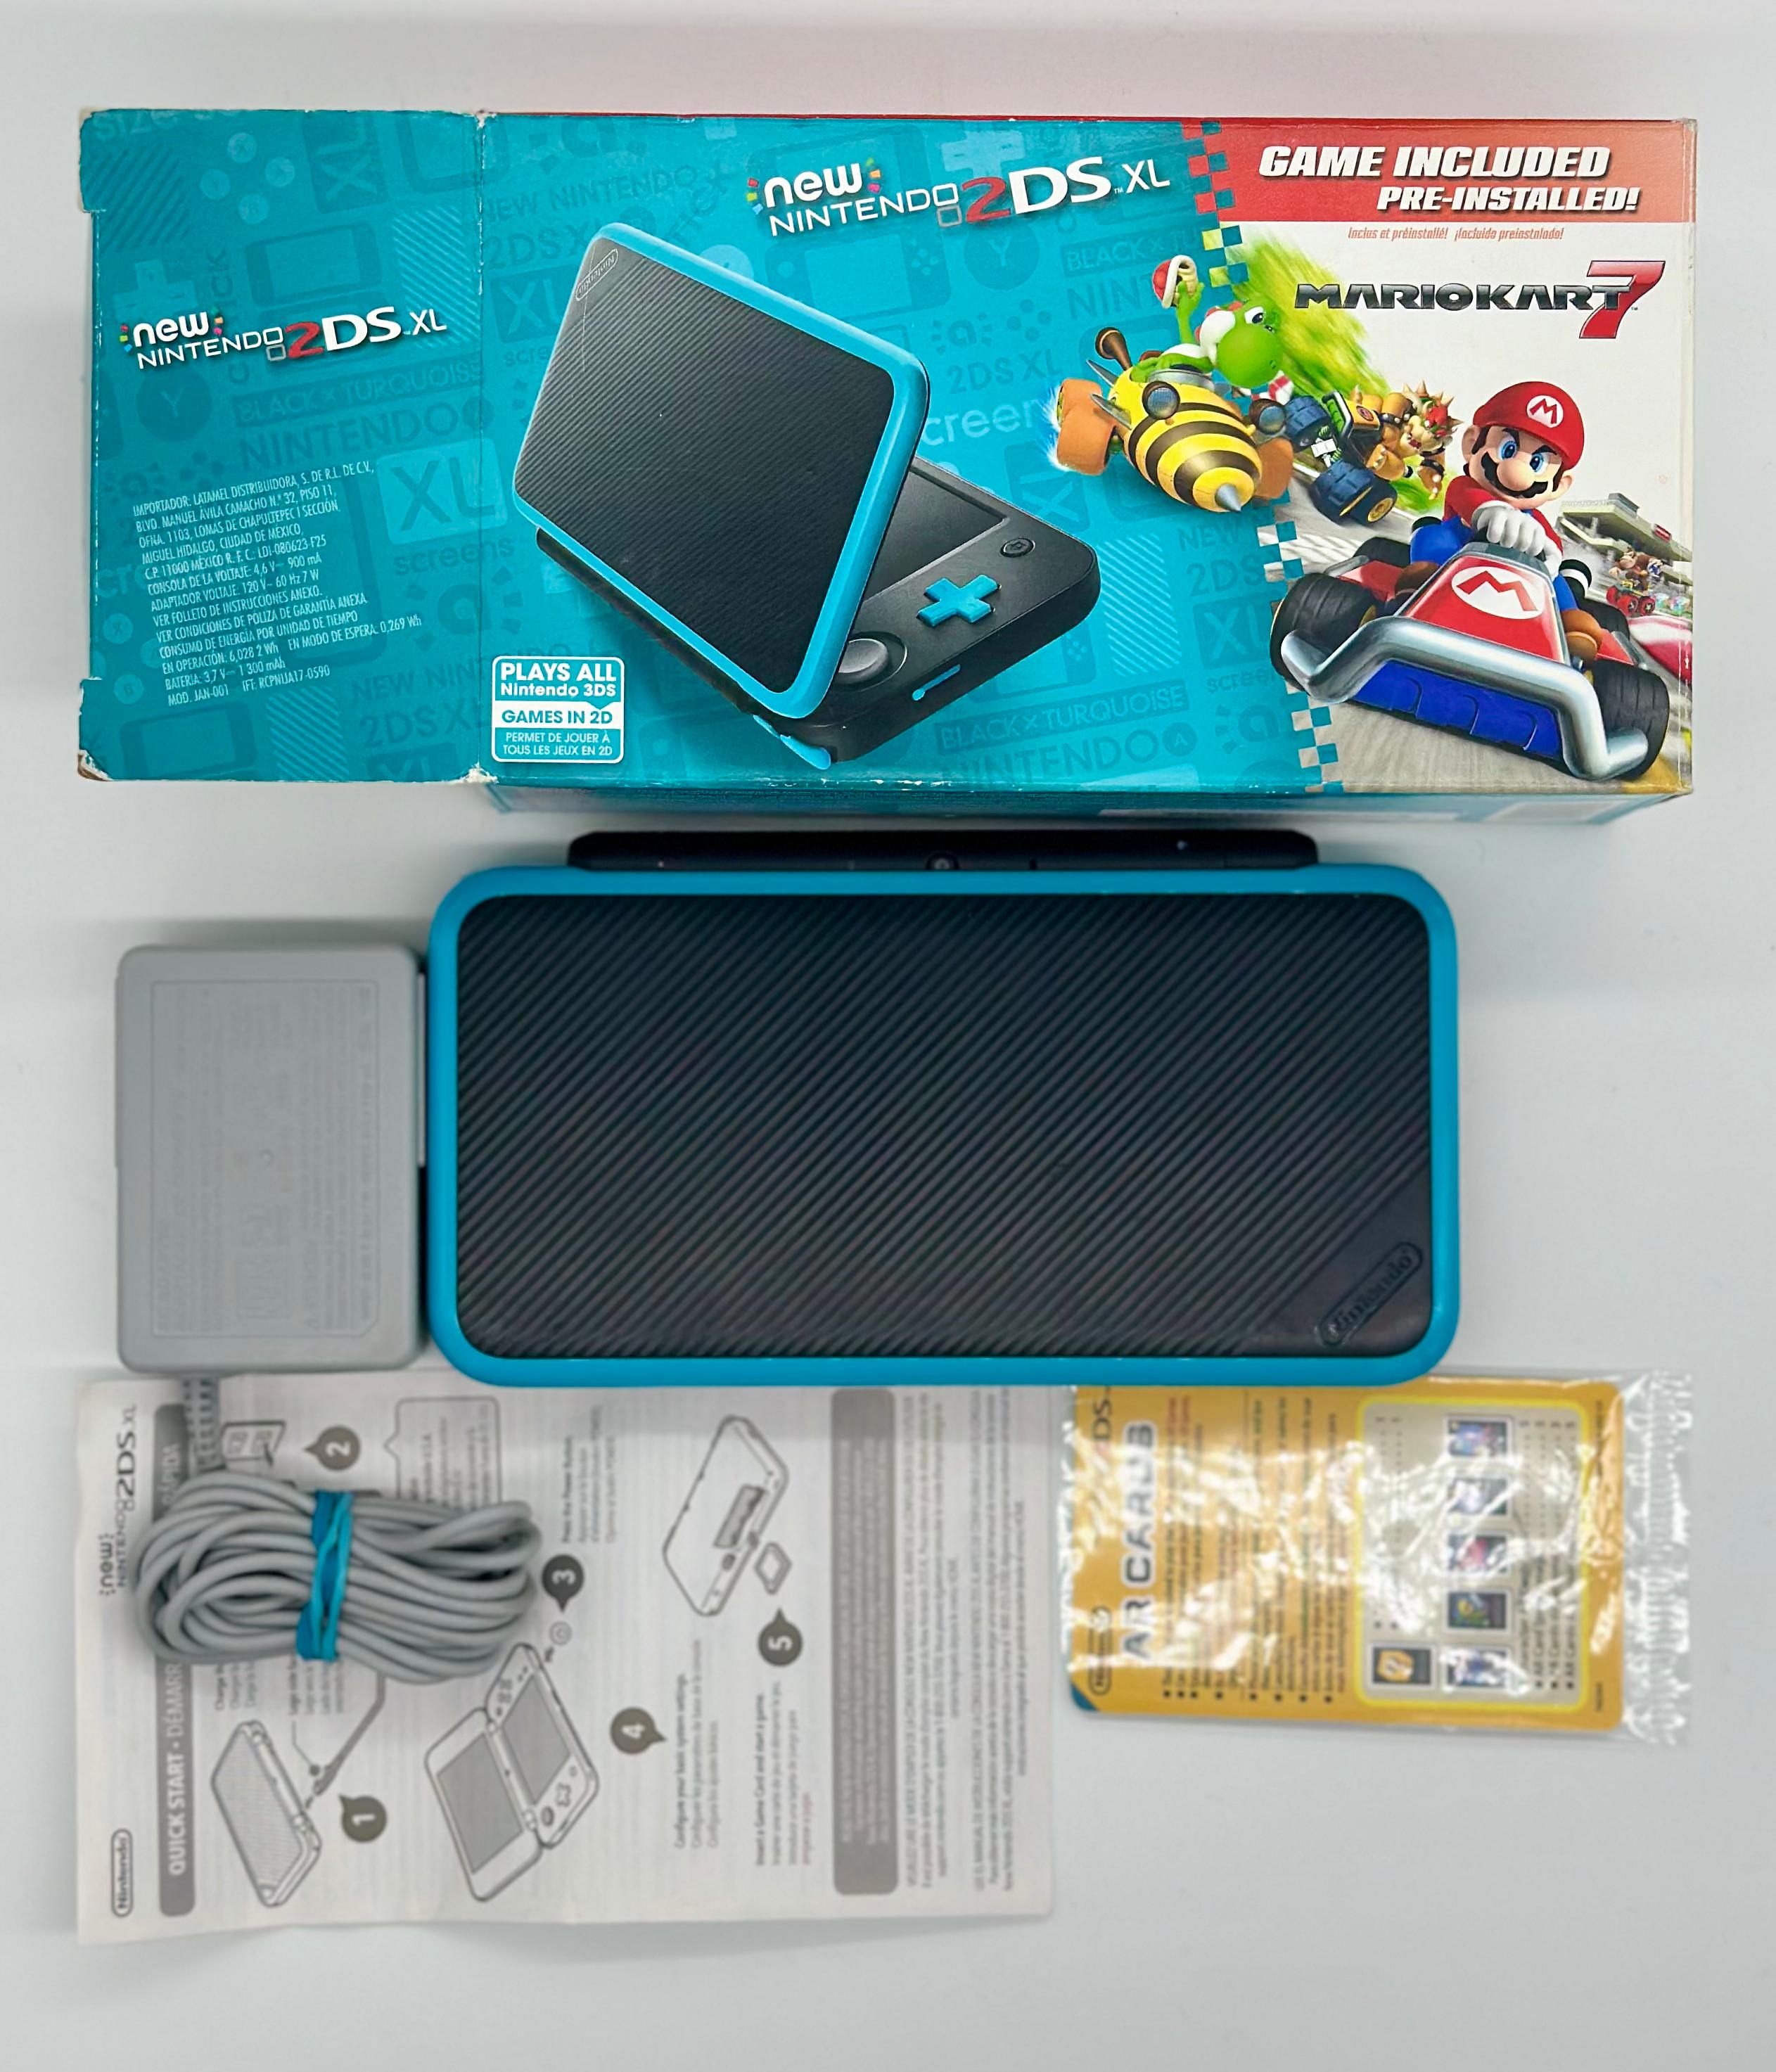 New Nintendo 2DS XL Black & Turquoise Handheld Console